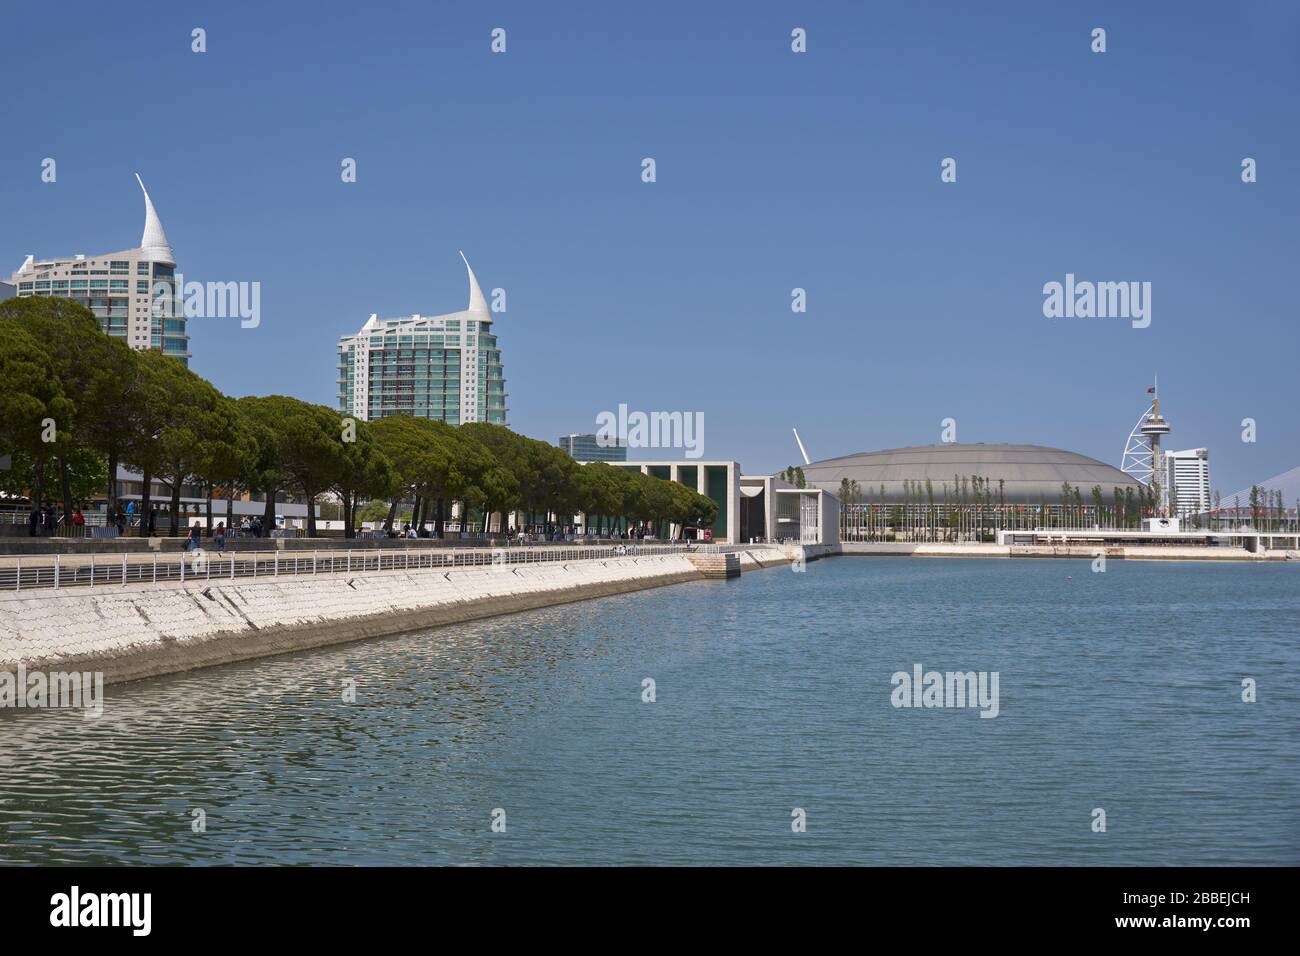 exteriors of the Lisbon promenade and oceanographic. Portugal March 2019 Stock Photo